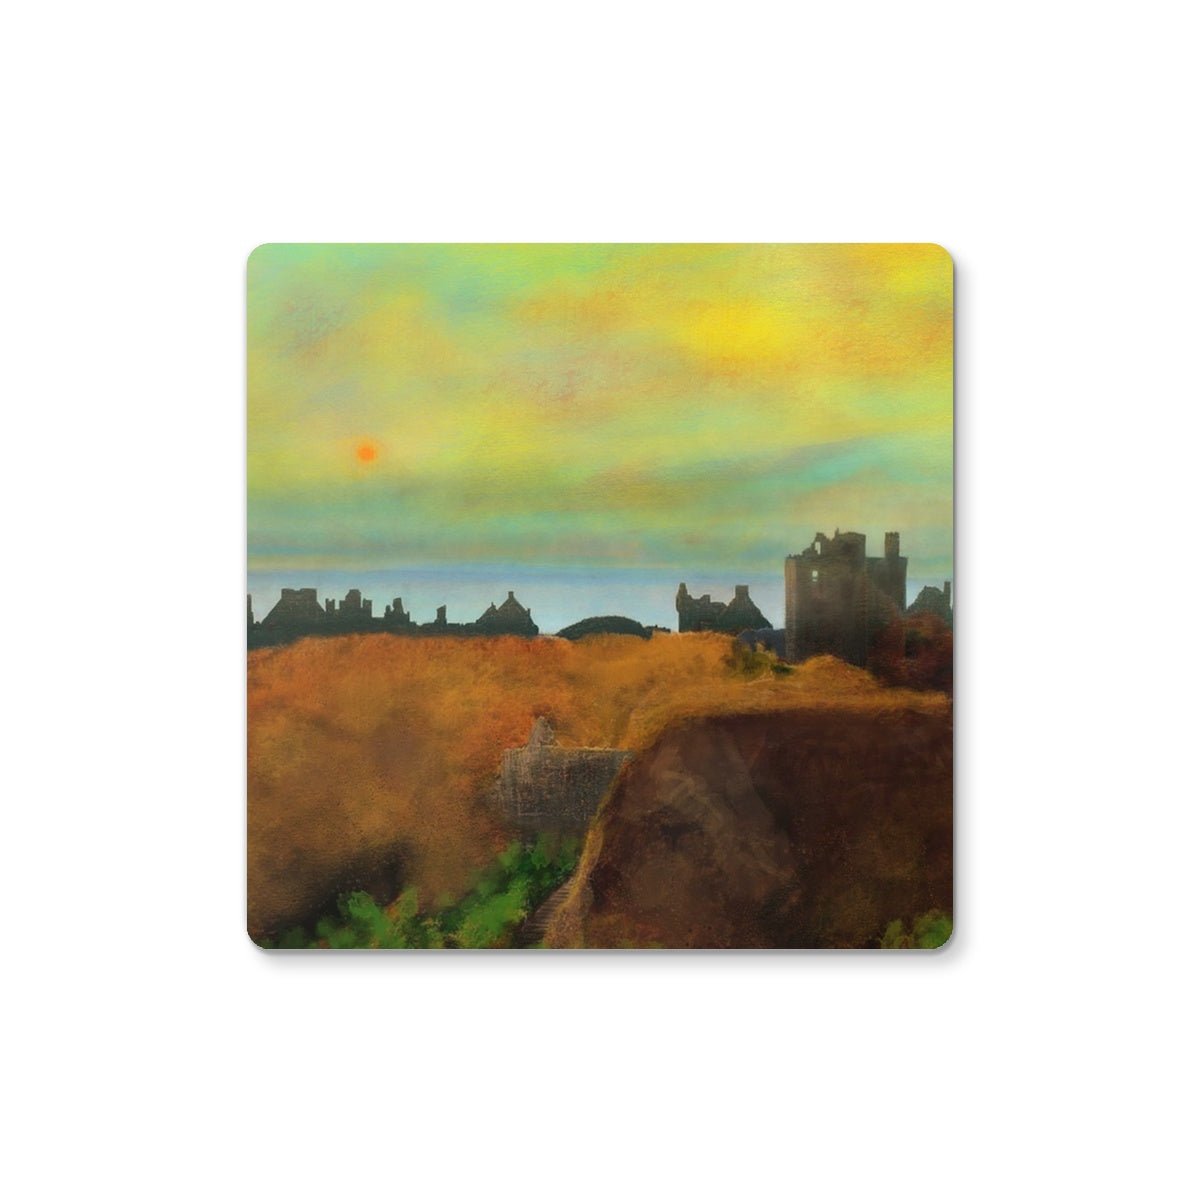 Dunnottar Castle Art Gifts Coaster-Coasters-Historic & Iconic Scotland Art Gallery-Single Coaster-Paintings, Prints, Homeware, Art Gifts From Scotland By Scottish Artist Kevin Hunter